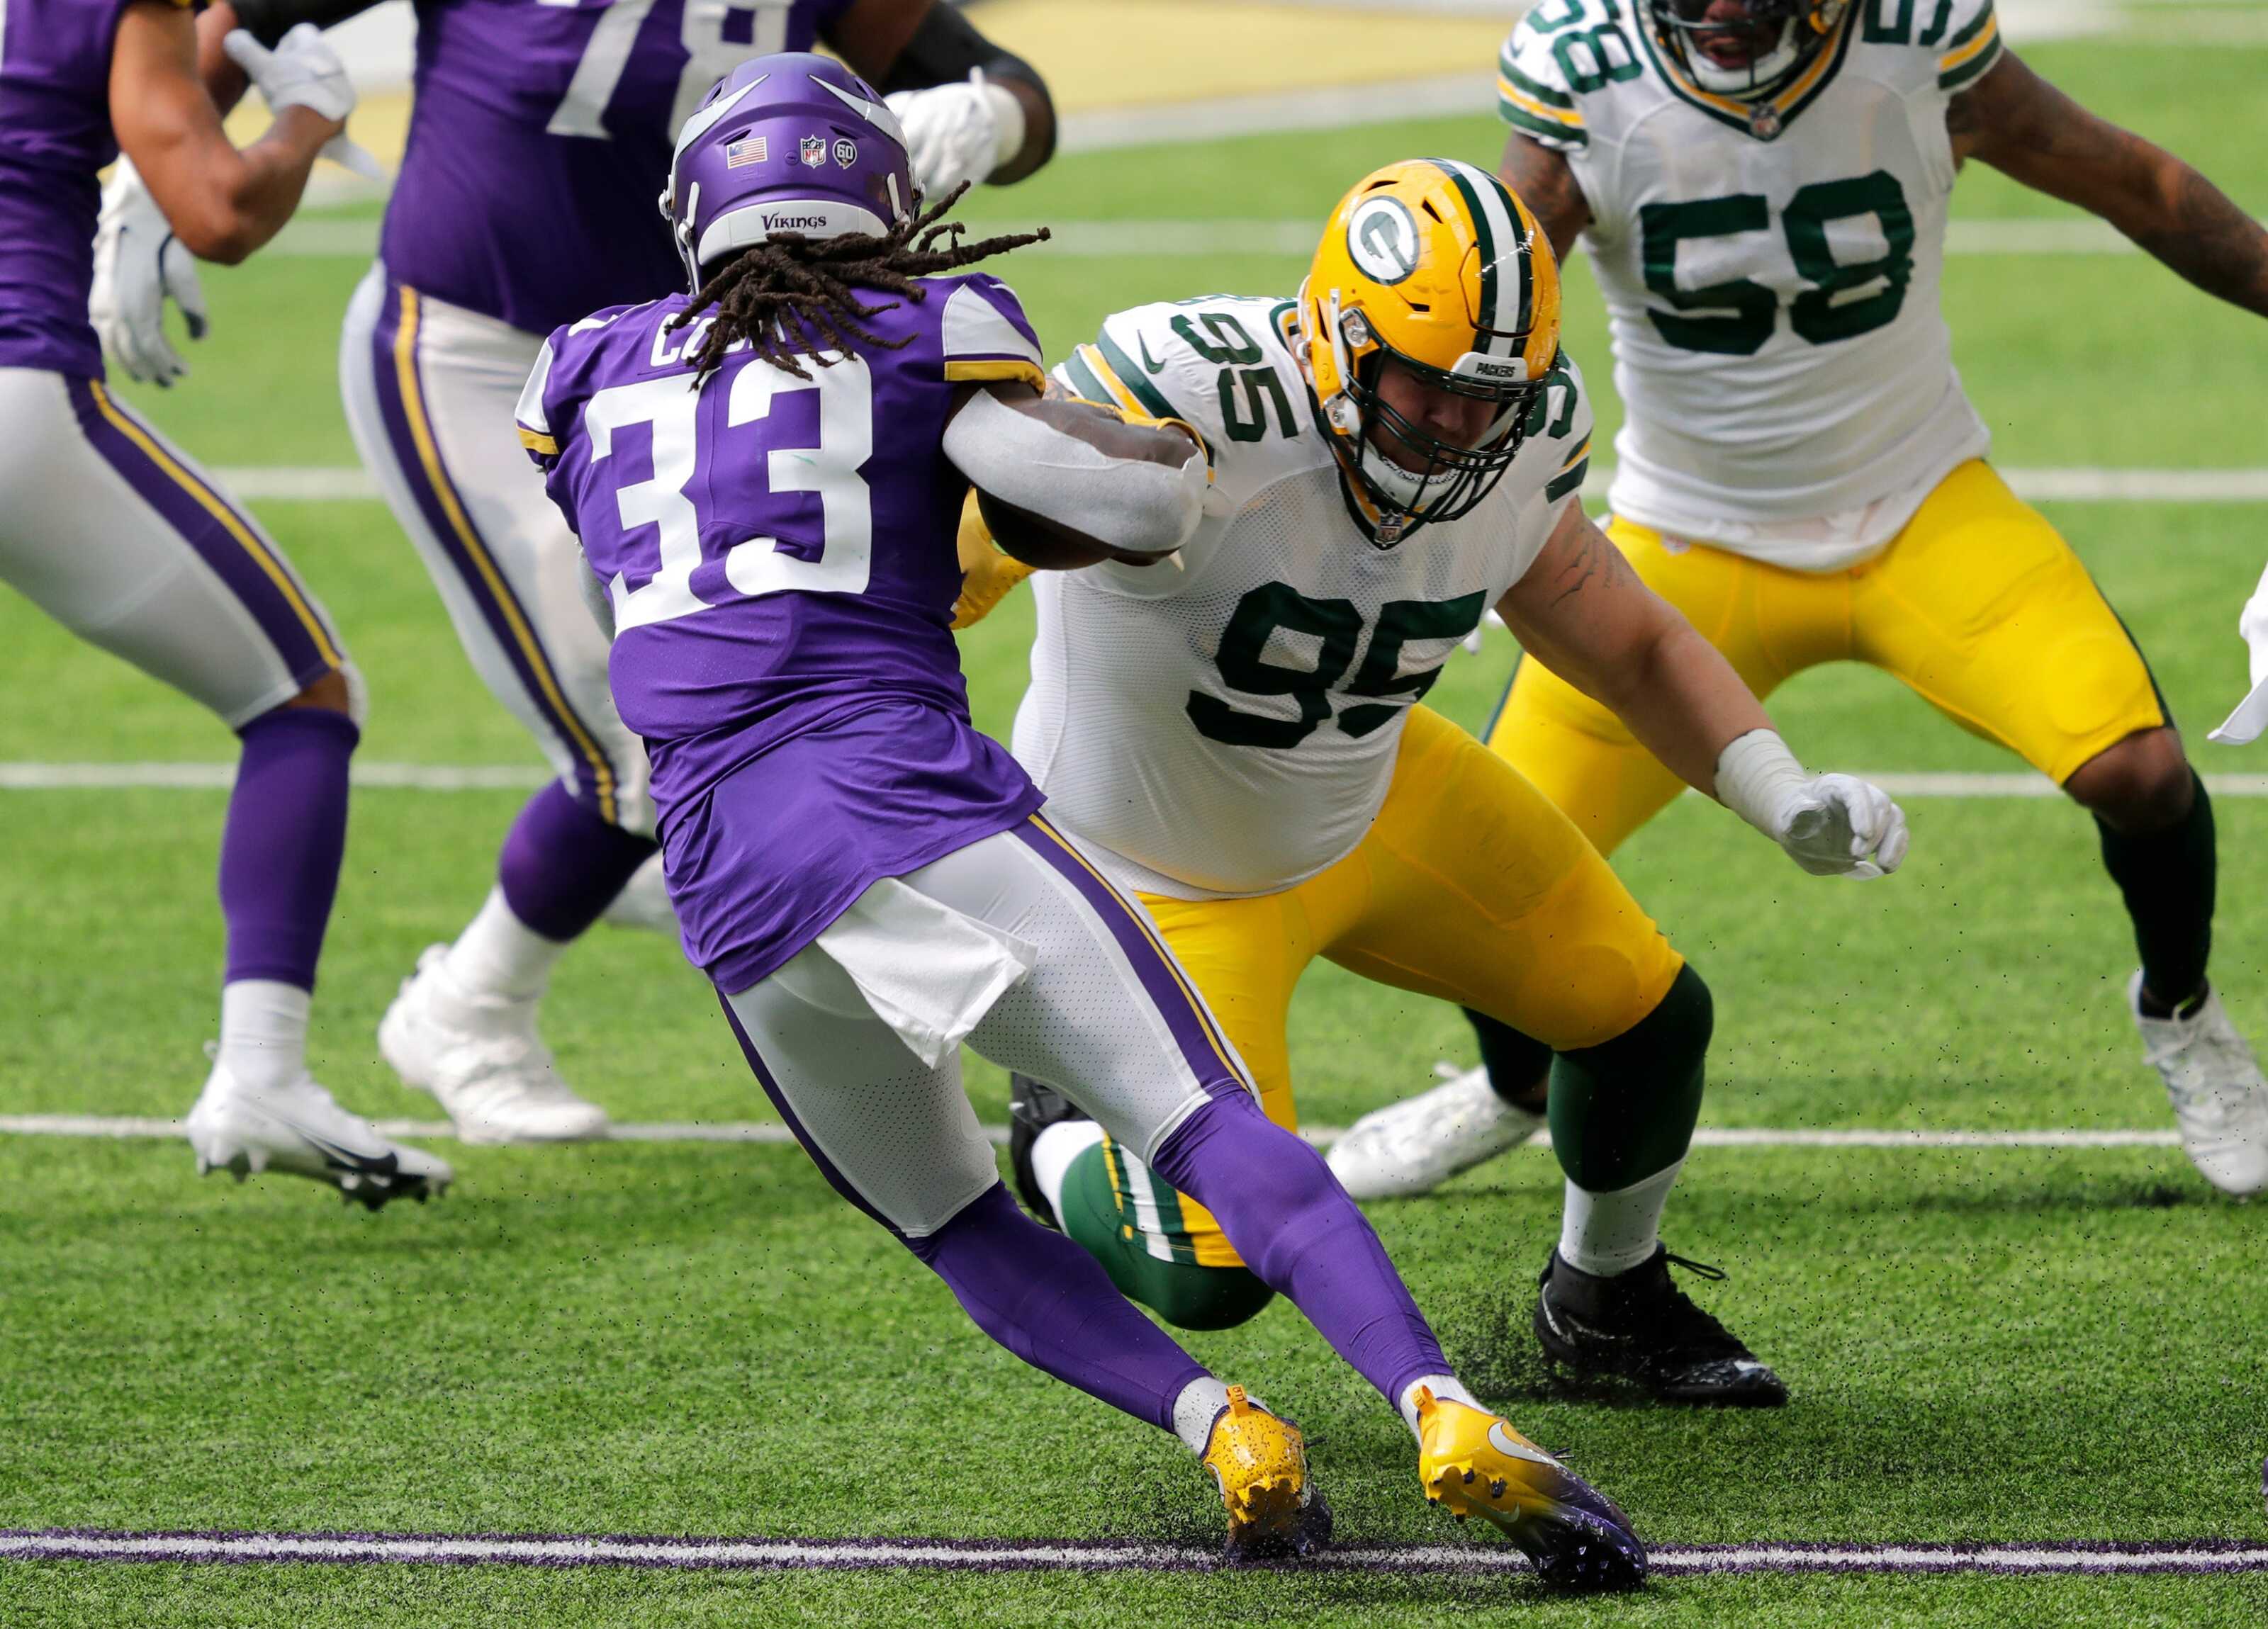 Final Thoughts on Green Bay Packers v. Minnesota Vikings